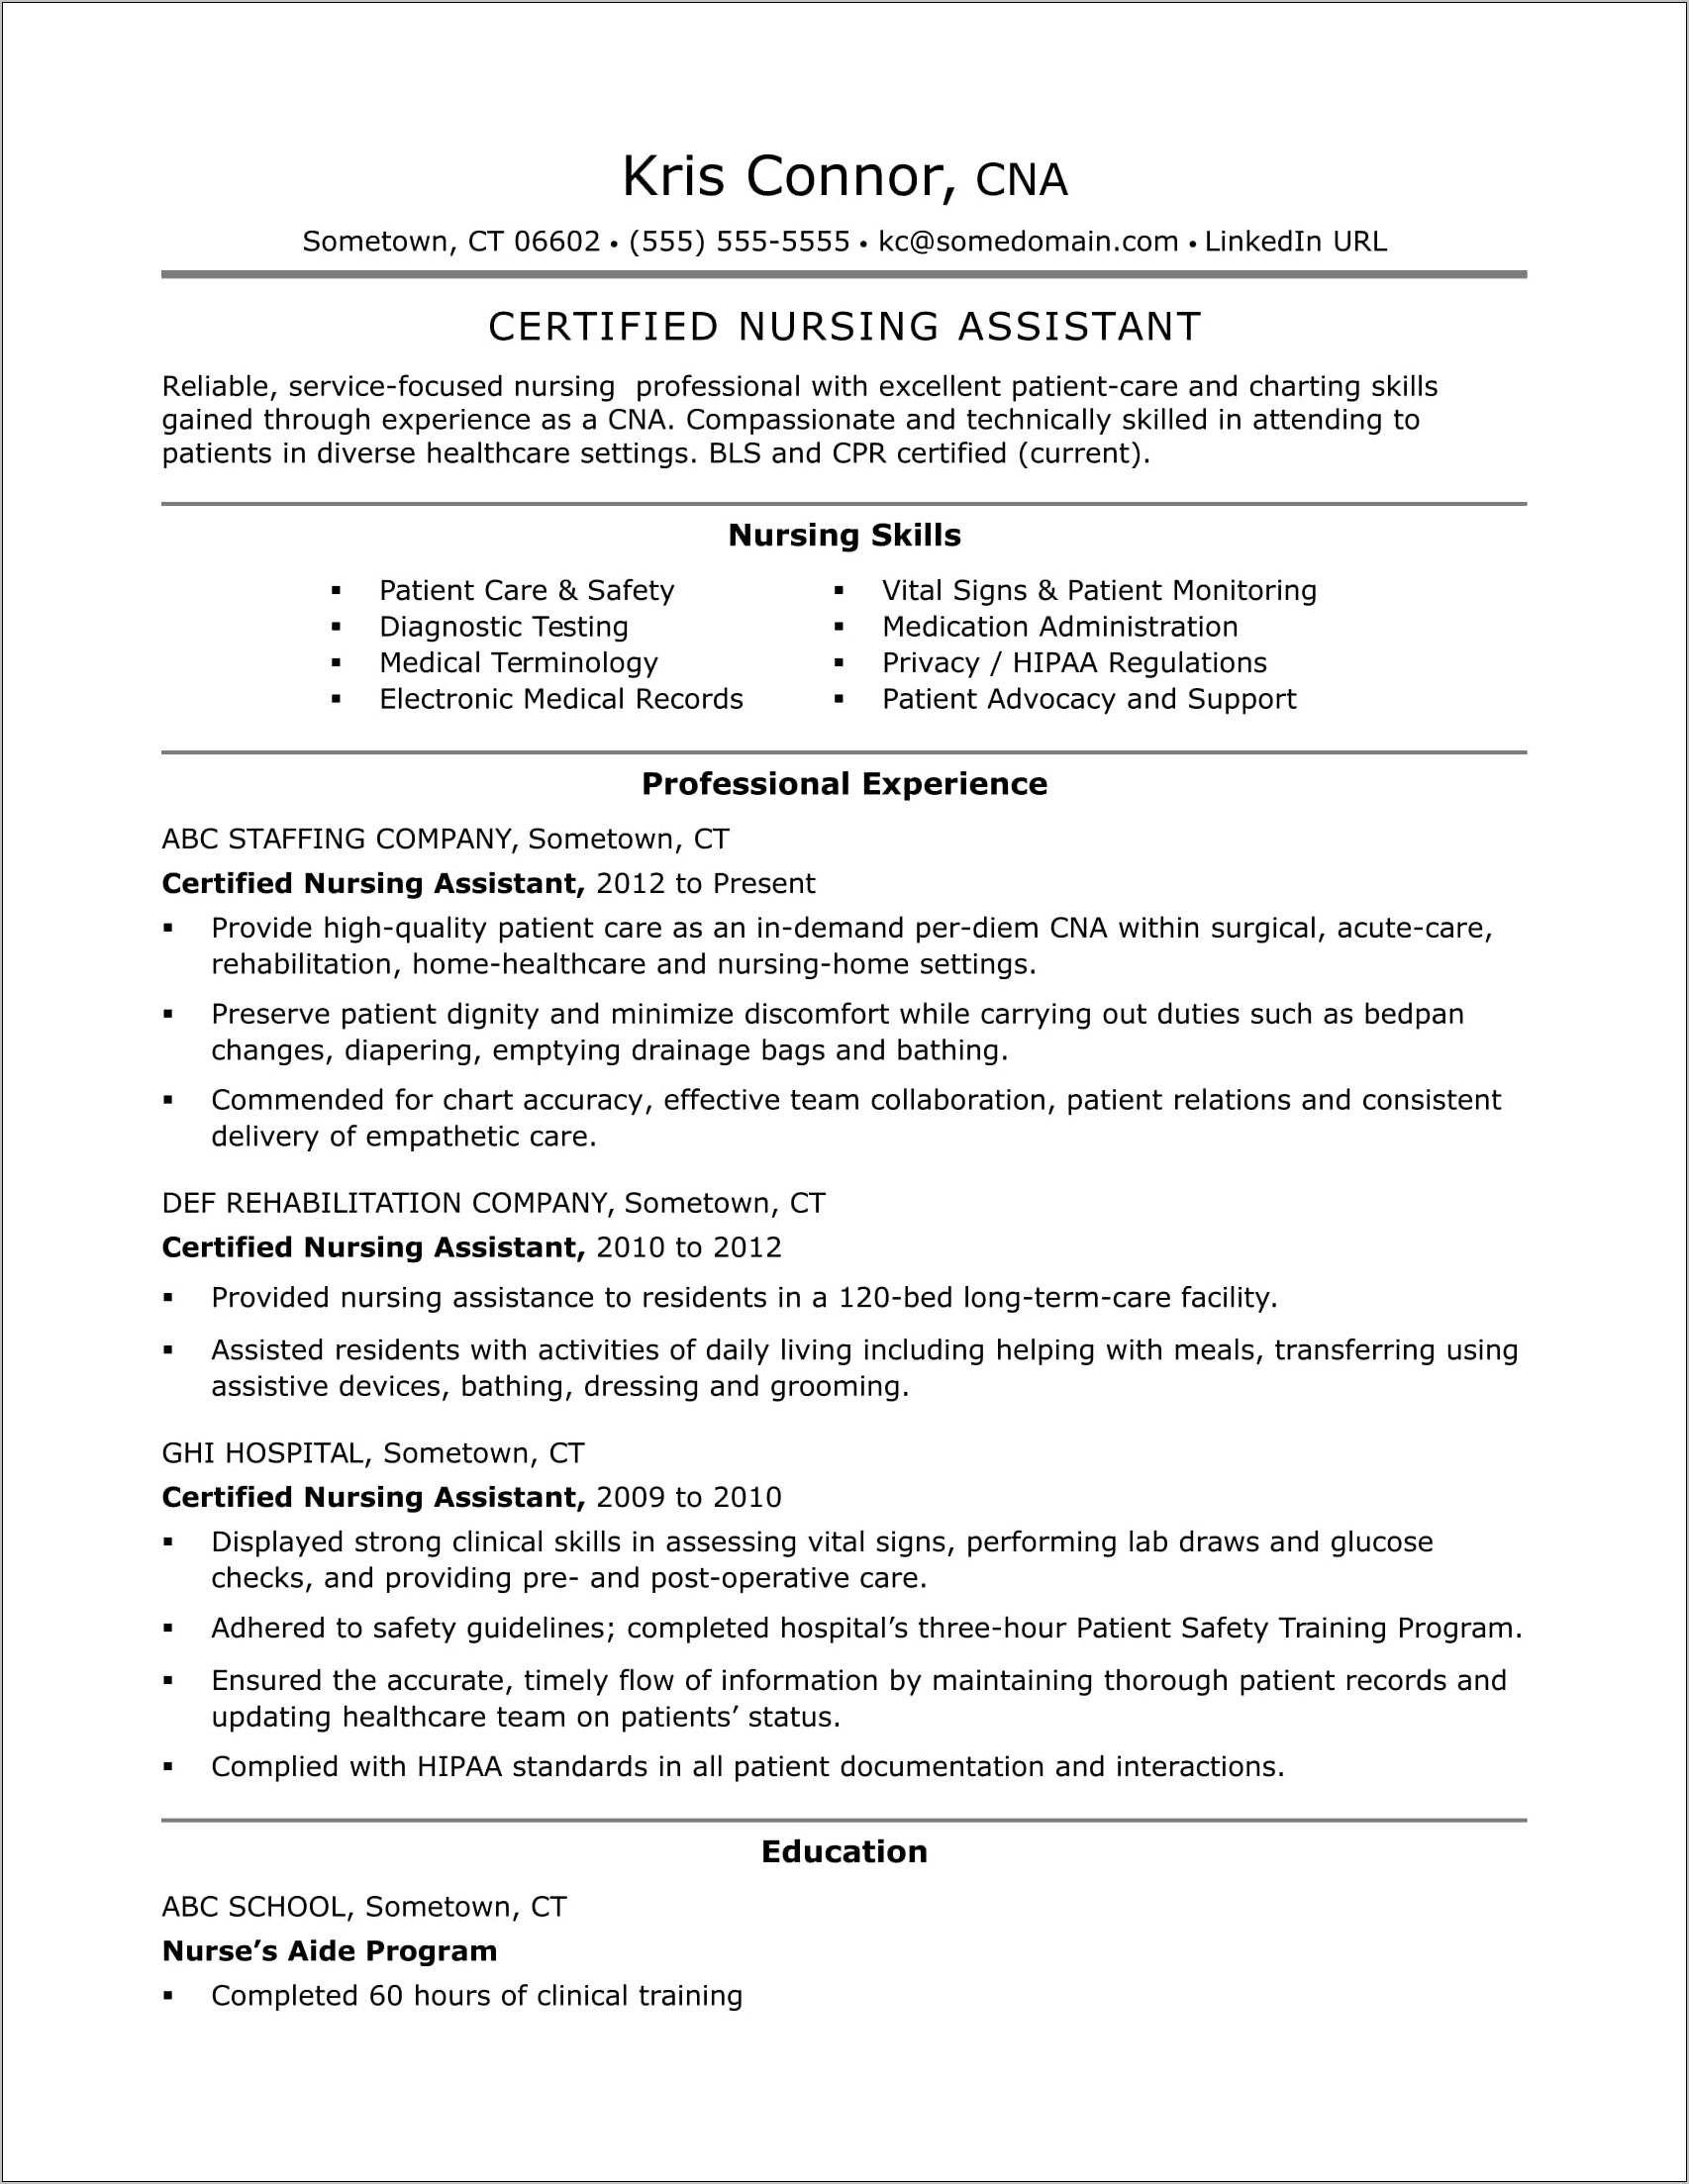 Nursing Home Resume Objective For Cna Dudties